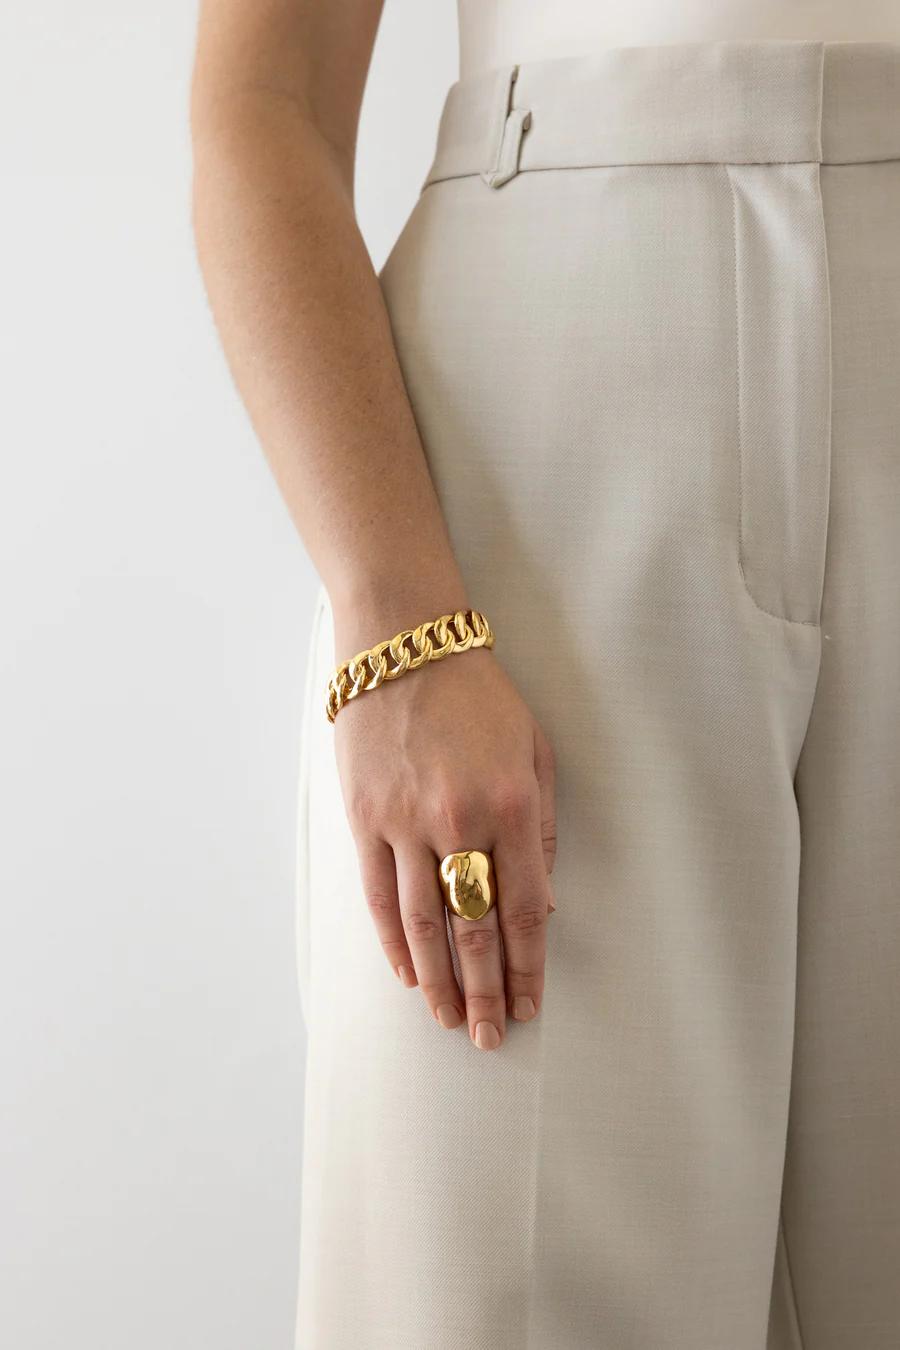 Product Image for Dylan Dome Ring, 14k Vermeil